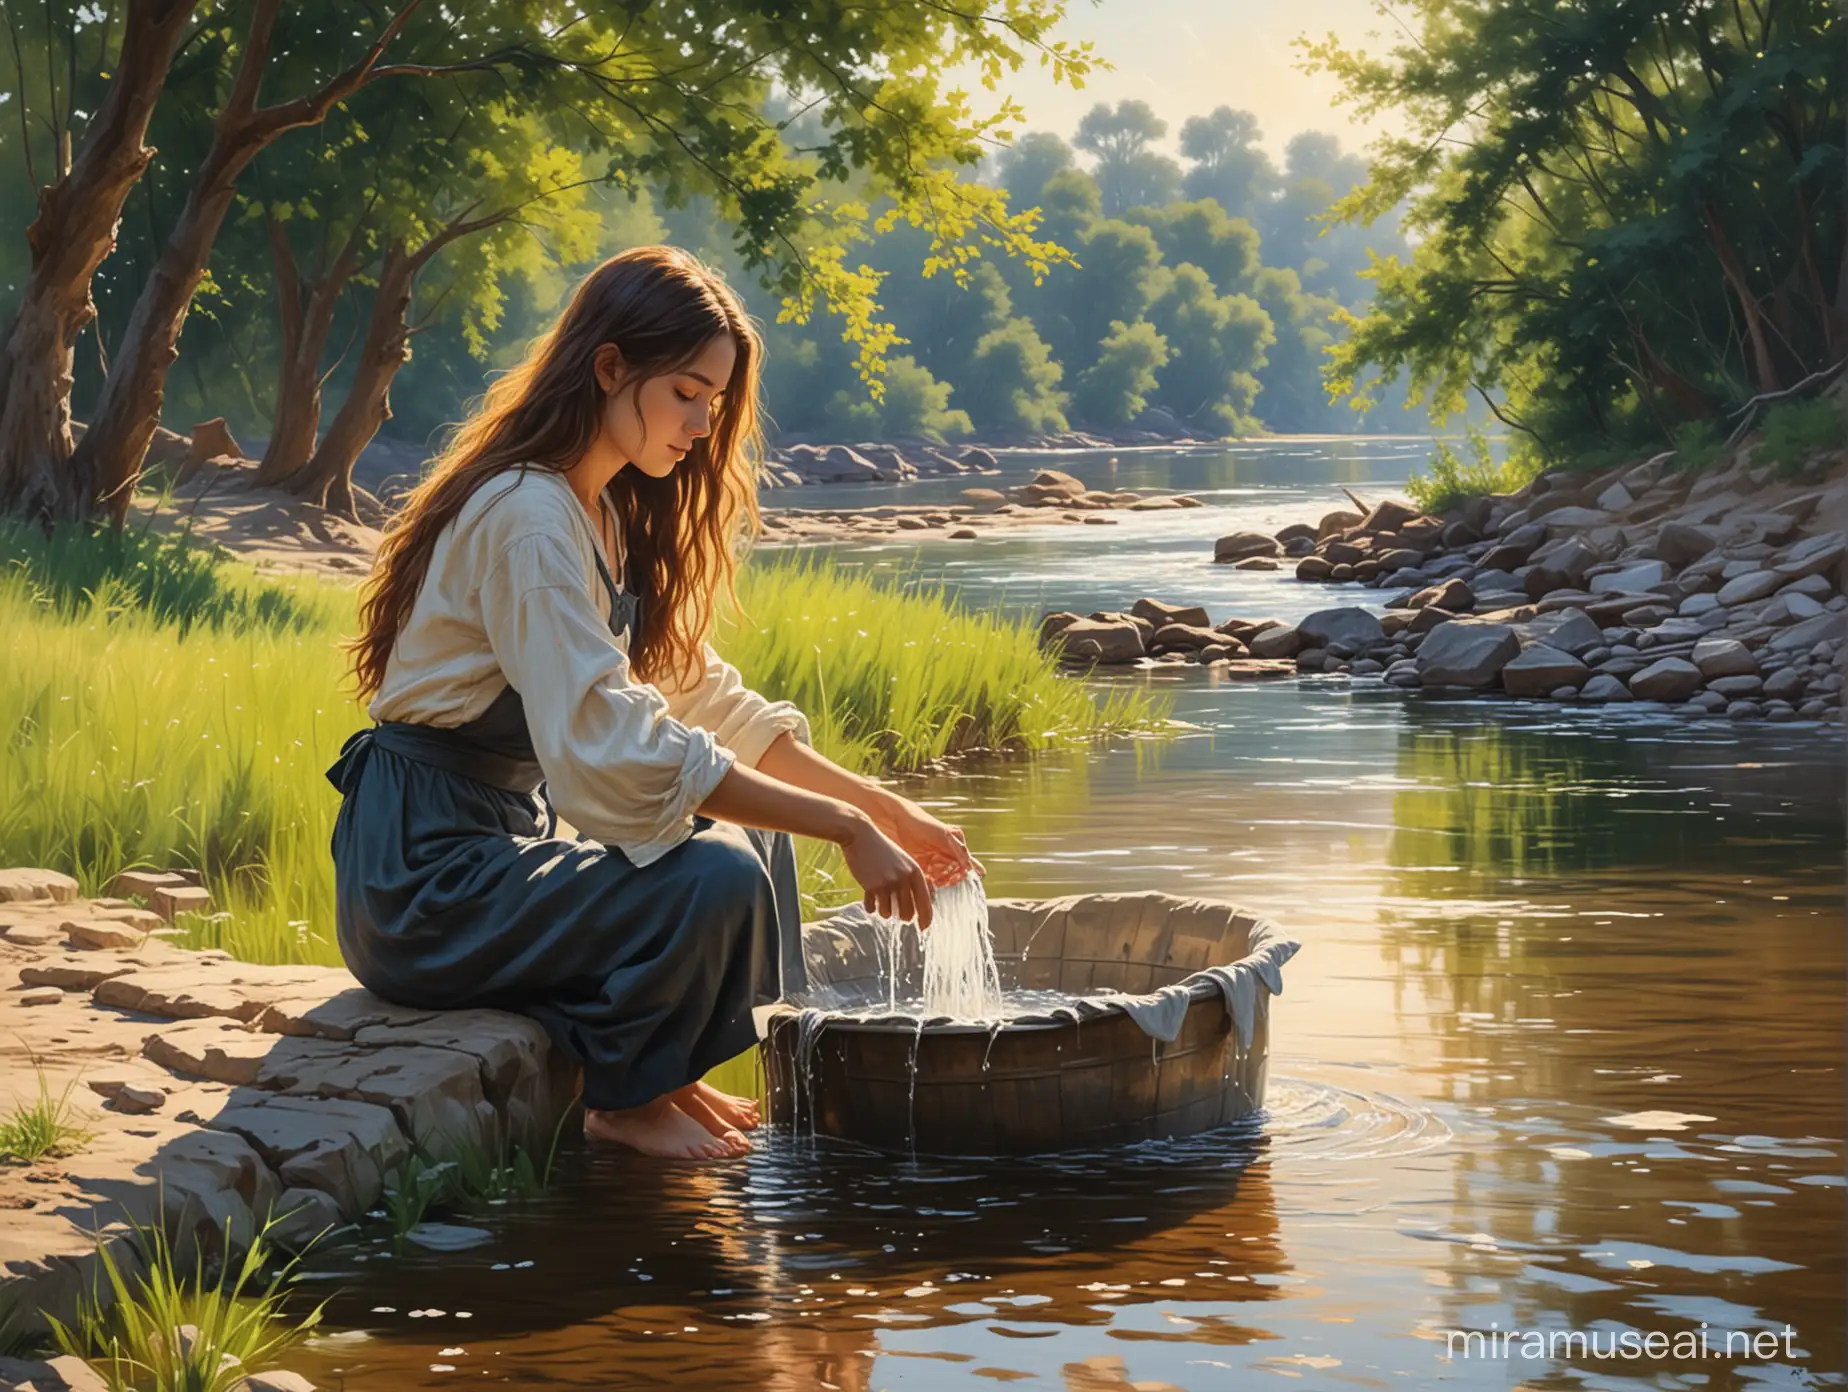 Youth Washing Clothes by the River in Oil Painting Style